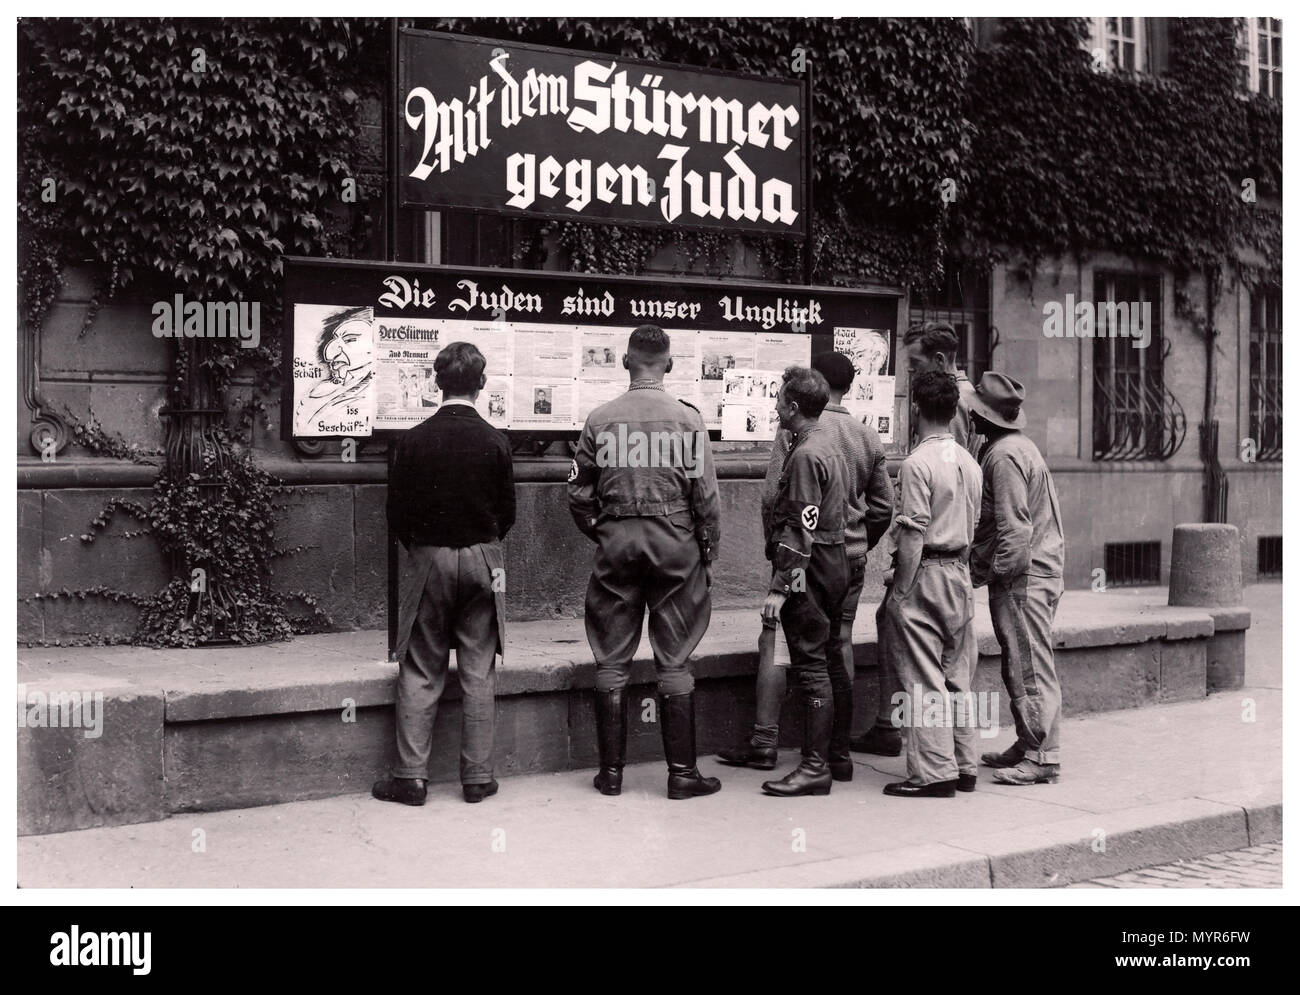 Vintage 1930’s Nazi Germany Propaganda Newspaper anti Semitic Der Stürmer (The Attacker) is posted in the street with NSDAP members and a motley dissolute group of German men reading the racist inflammatory headline which reads “The Jews are our Misfortune” City of Worms Germany 1935 Stock Photo